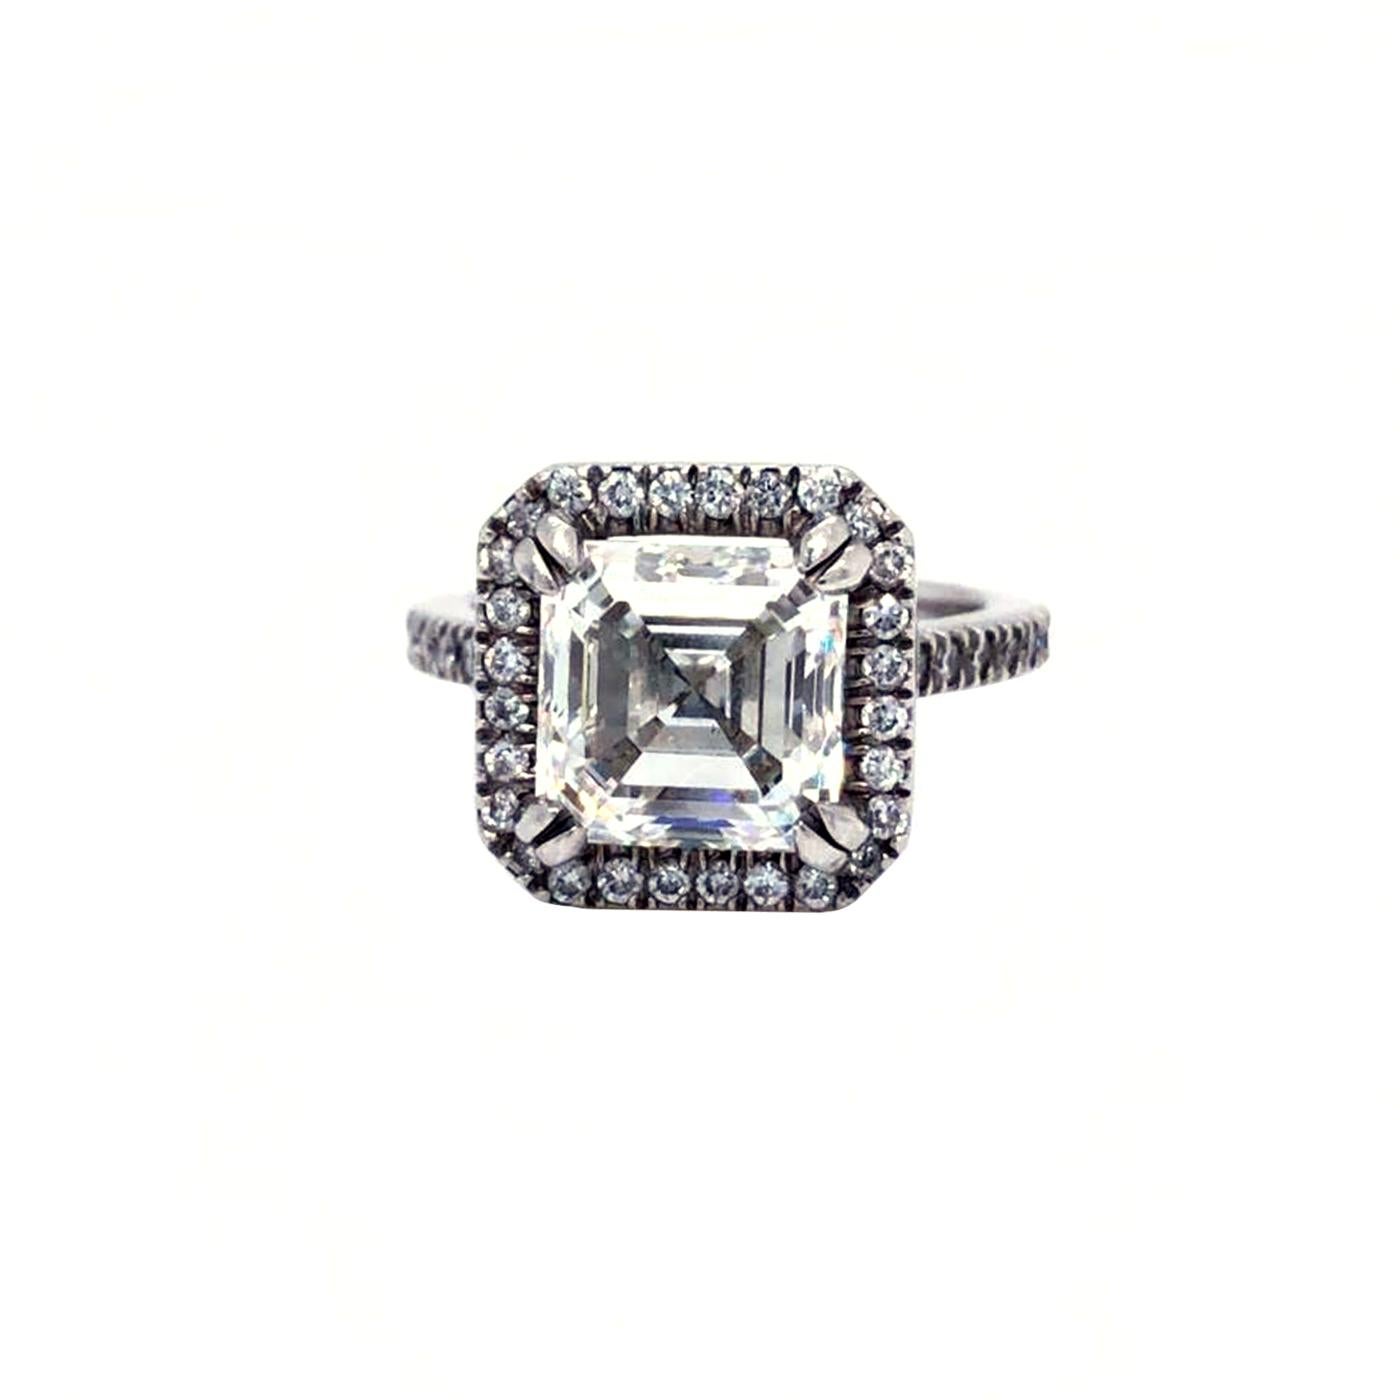 This breathtaking ring features an Asscher Cut diamonds natural diamond of H color and VS1 clarity. Set in a sleek, Platinum Metal, with a size of 6, this fantastic piece is guaranteed to delight for decades to come!

Details:
GIA Report Number: